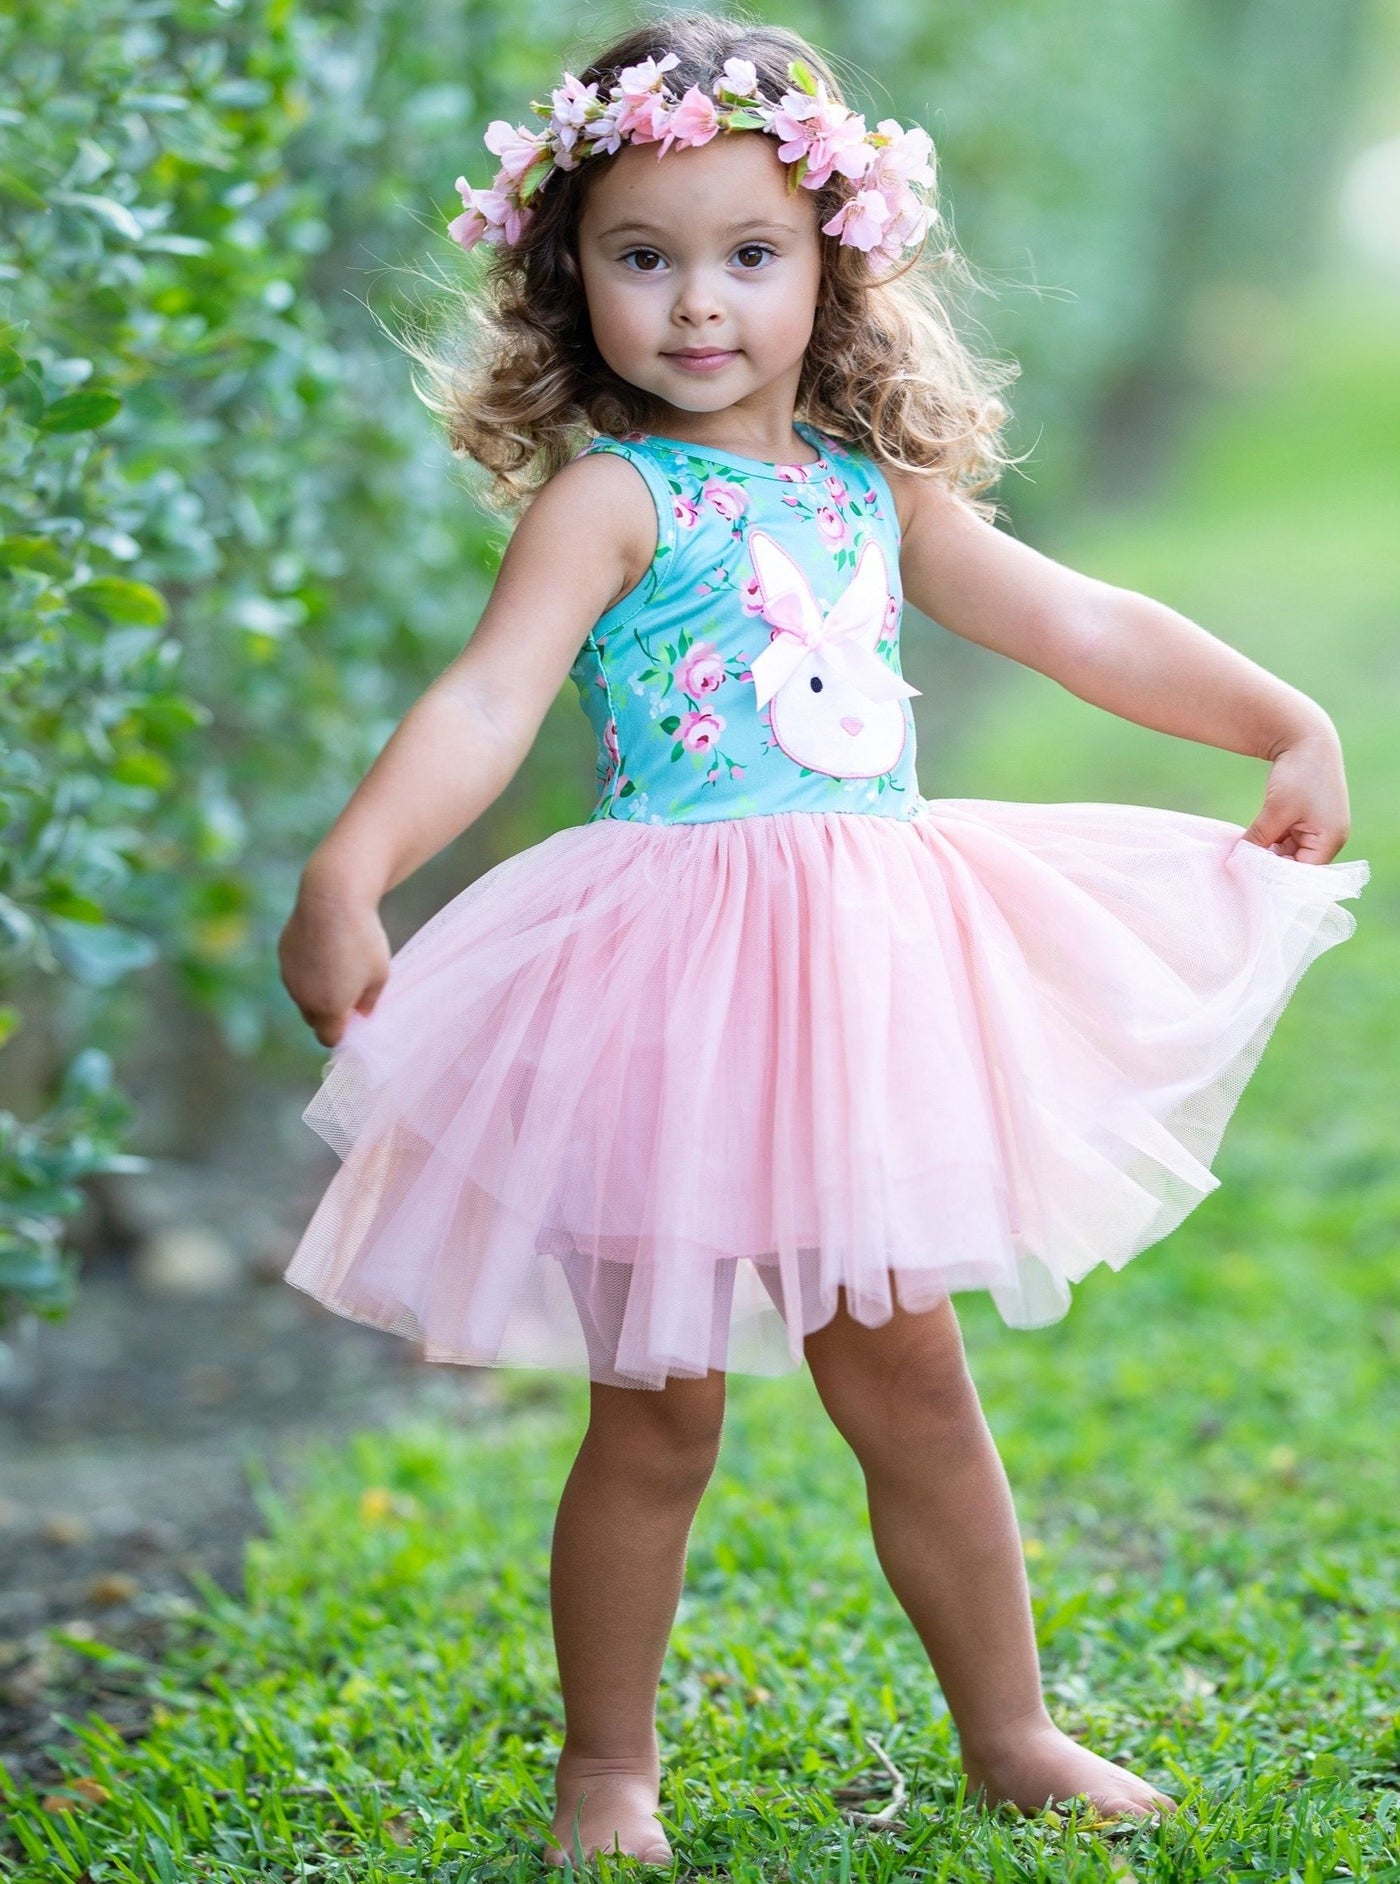 Girls Fantastically Floral Bunny Sleeveless Tutu Dress - Spring Outfit For 2T/8Y Toddlers and Girls